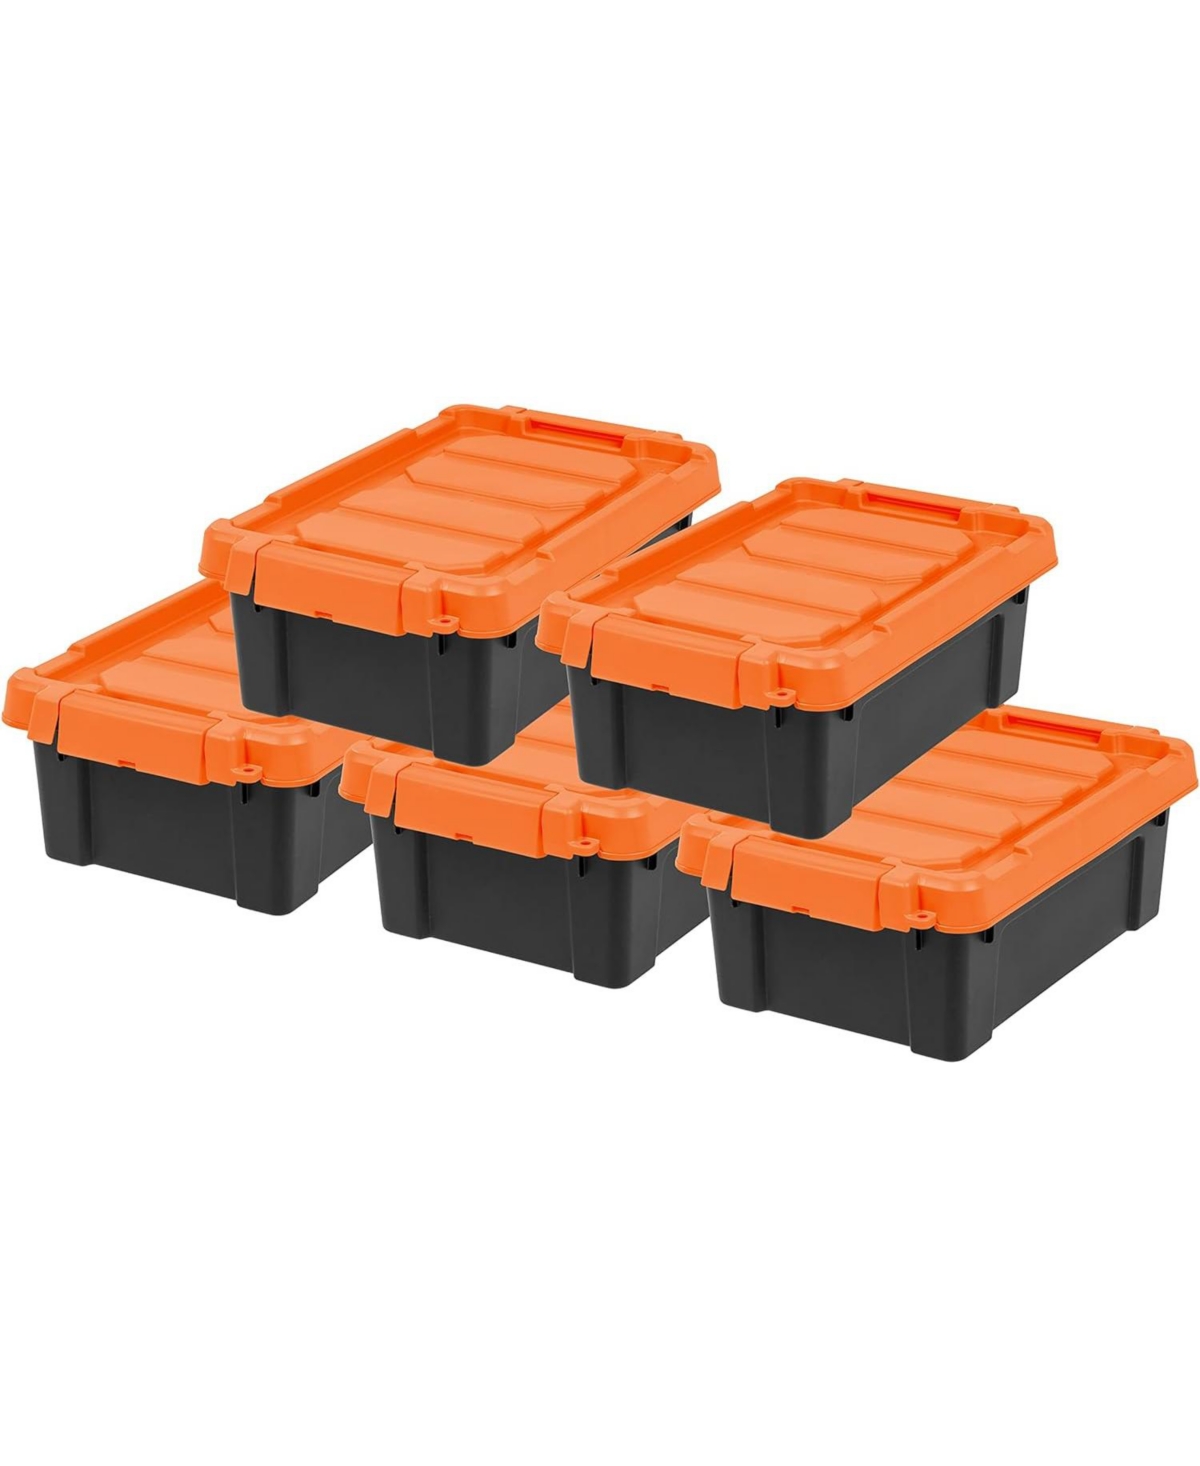 3 Gallon Lockable Storage Totes with Lids, 5 Pack - Orange Lid, Heavy-Duty Durable Stackable Containers, Large Garage Organizing Bins Moving